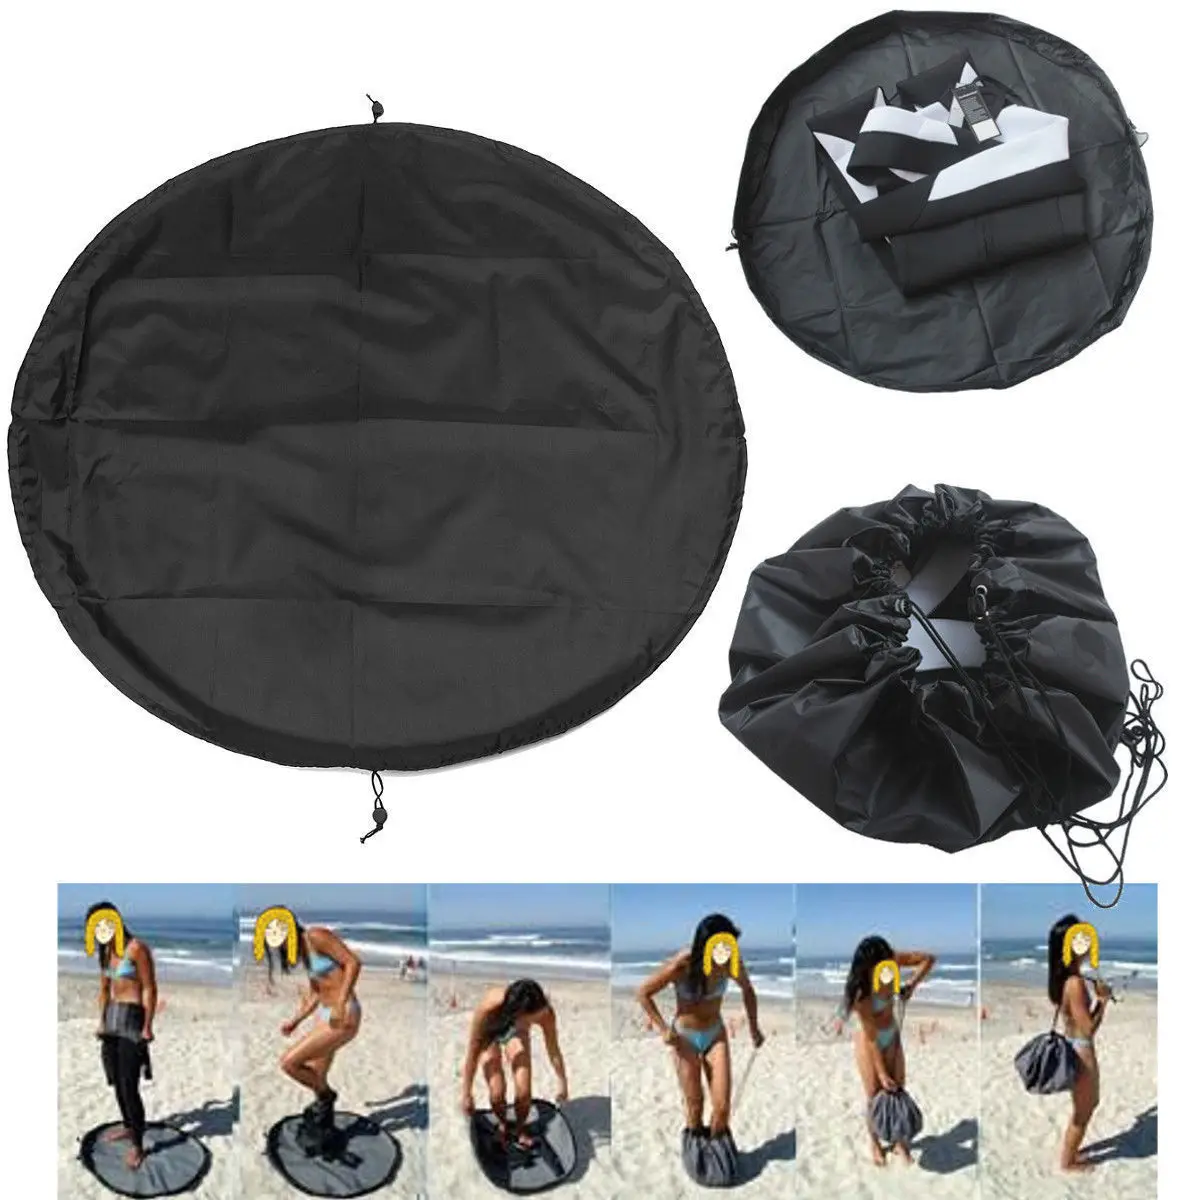 Beach Swimming Clothes Storage Bag Wetsuit Storage Bag Beach Surfing Suit Quick Change Storage Bag 90cm In Diameter 0 3 3 4mm mini multi three jaw chuck m7 m8 0 75mm drill chuck 14mm diameter keyless quick change electric drill replace parts